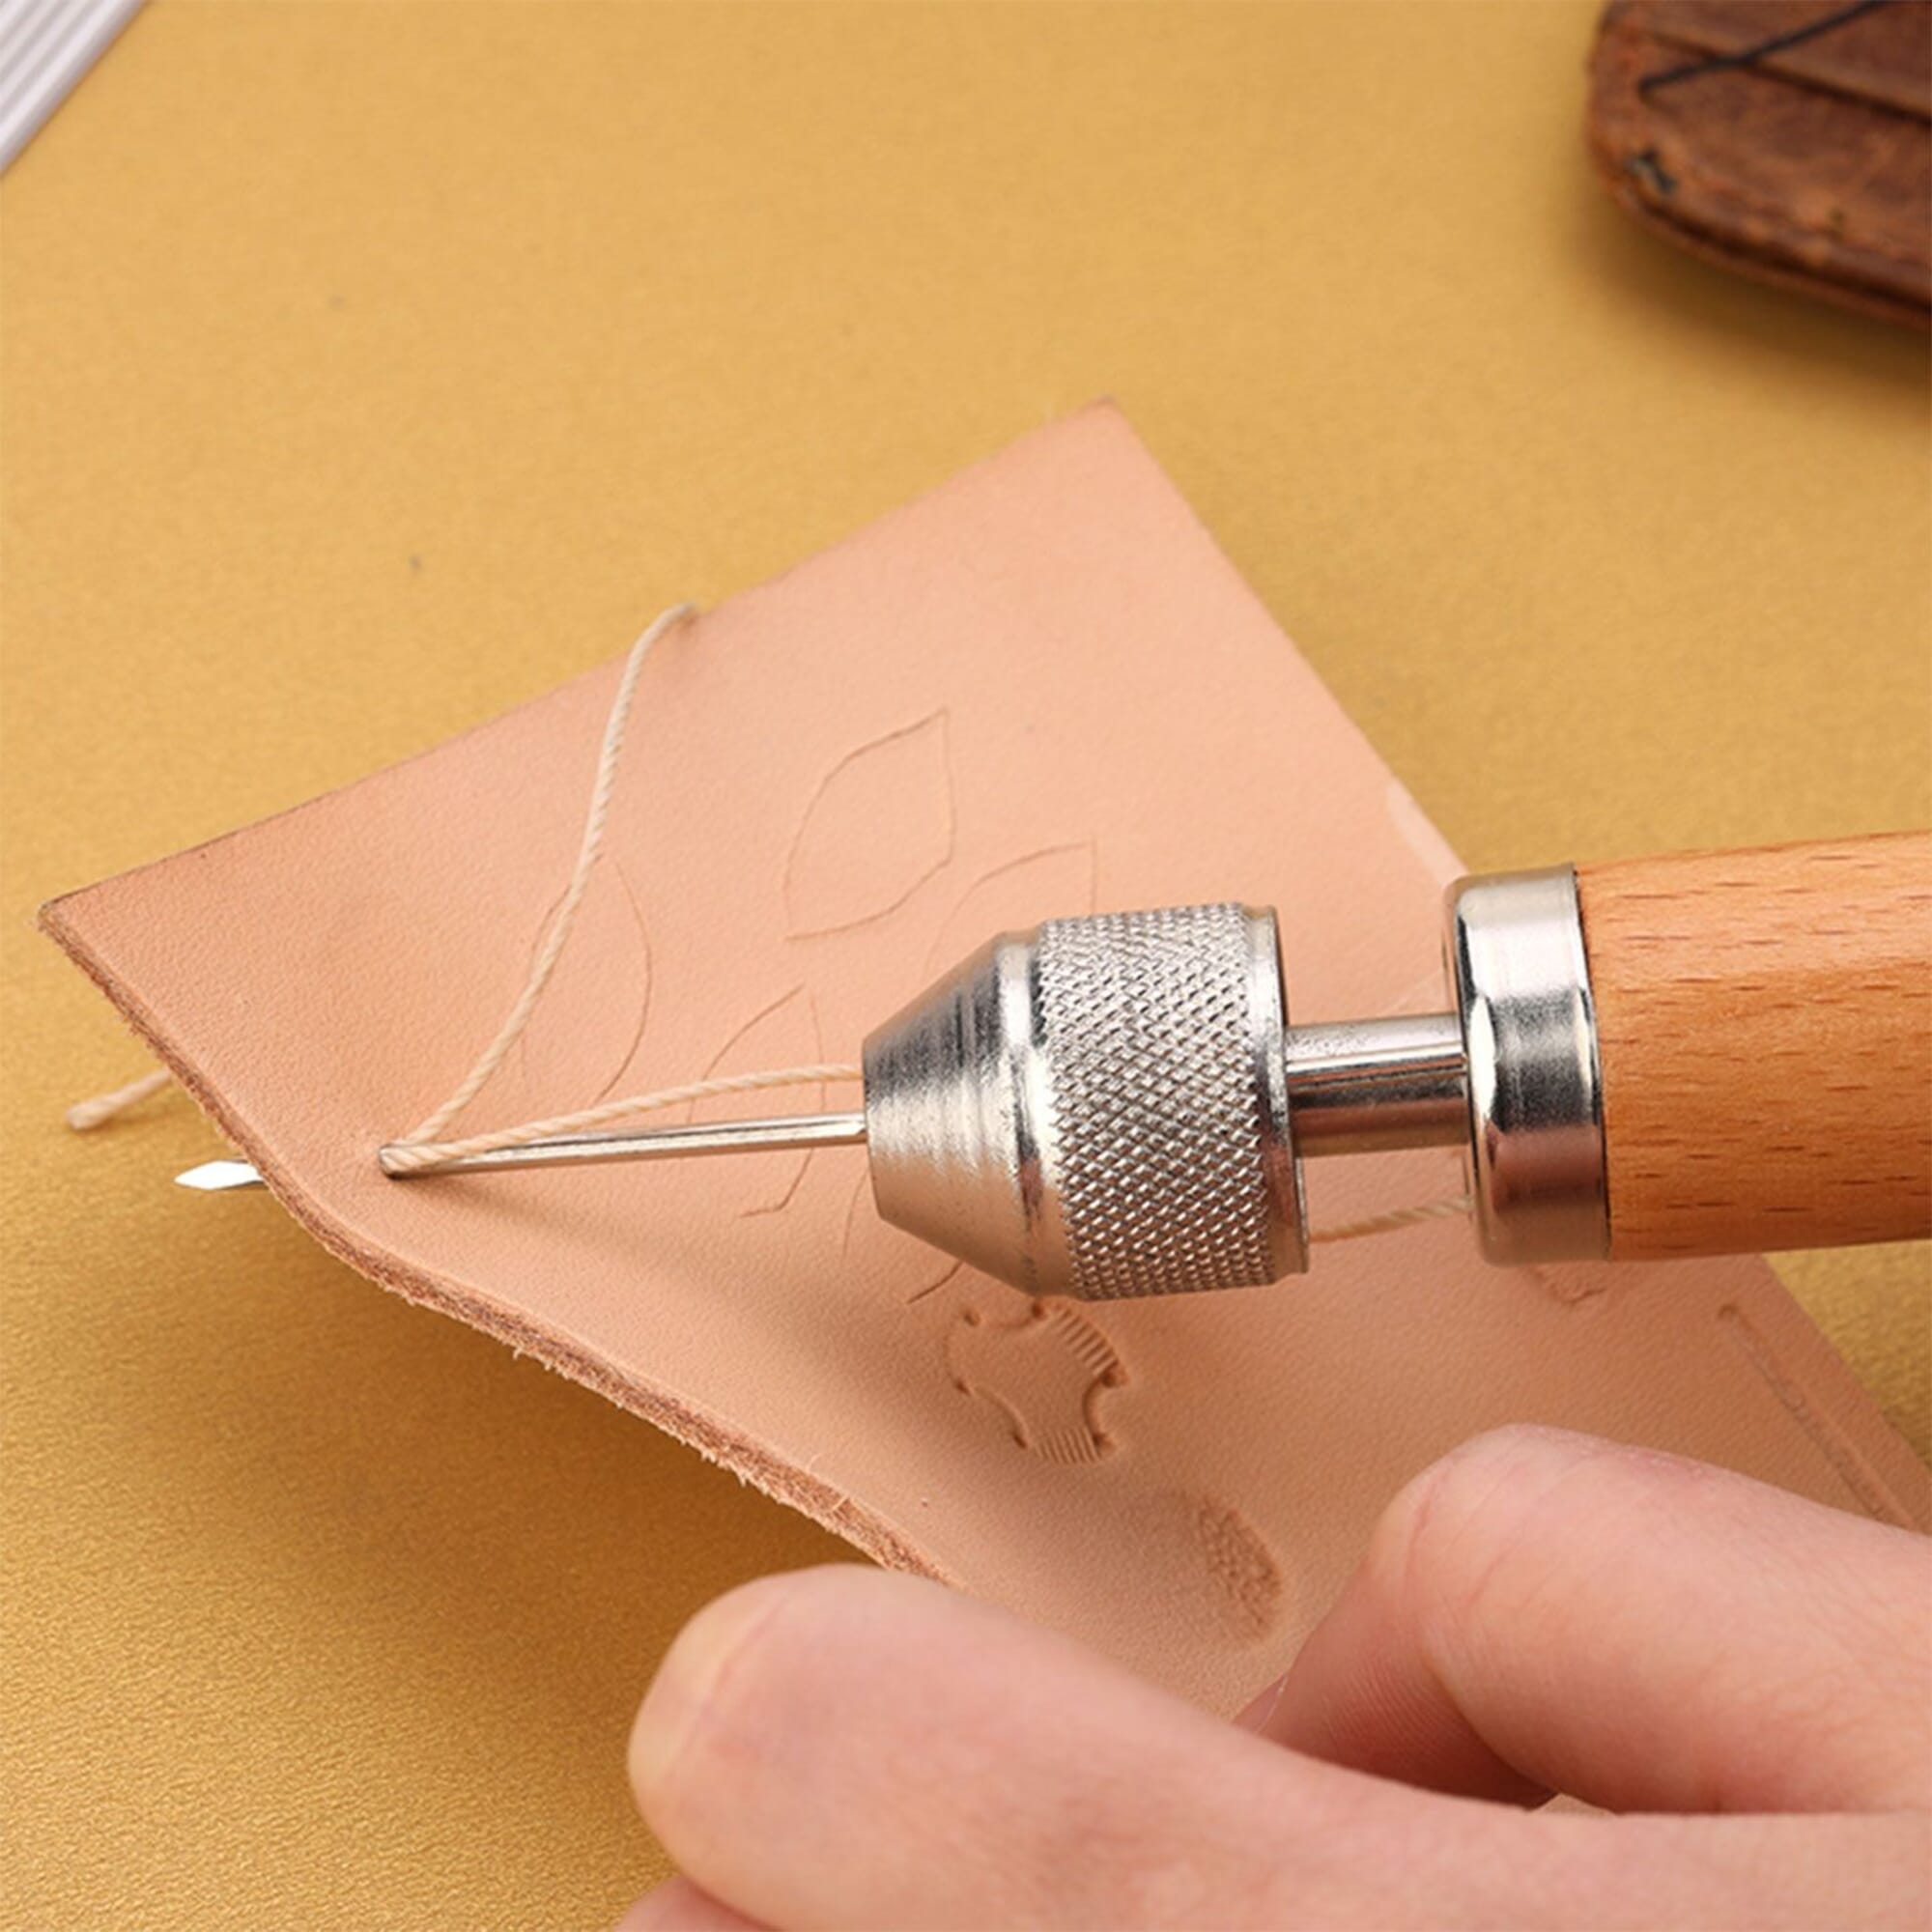 Generic Professional Leather Craft Tools Kit Hand Sewing Stitching